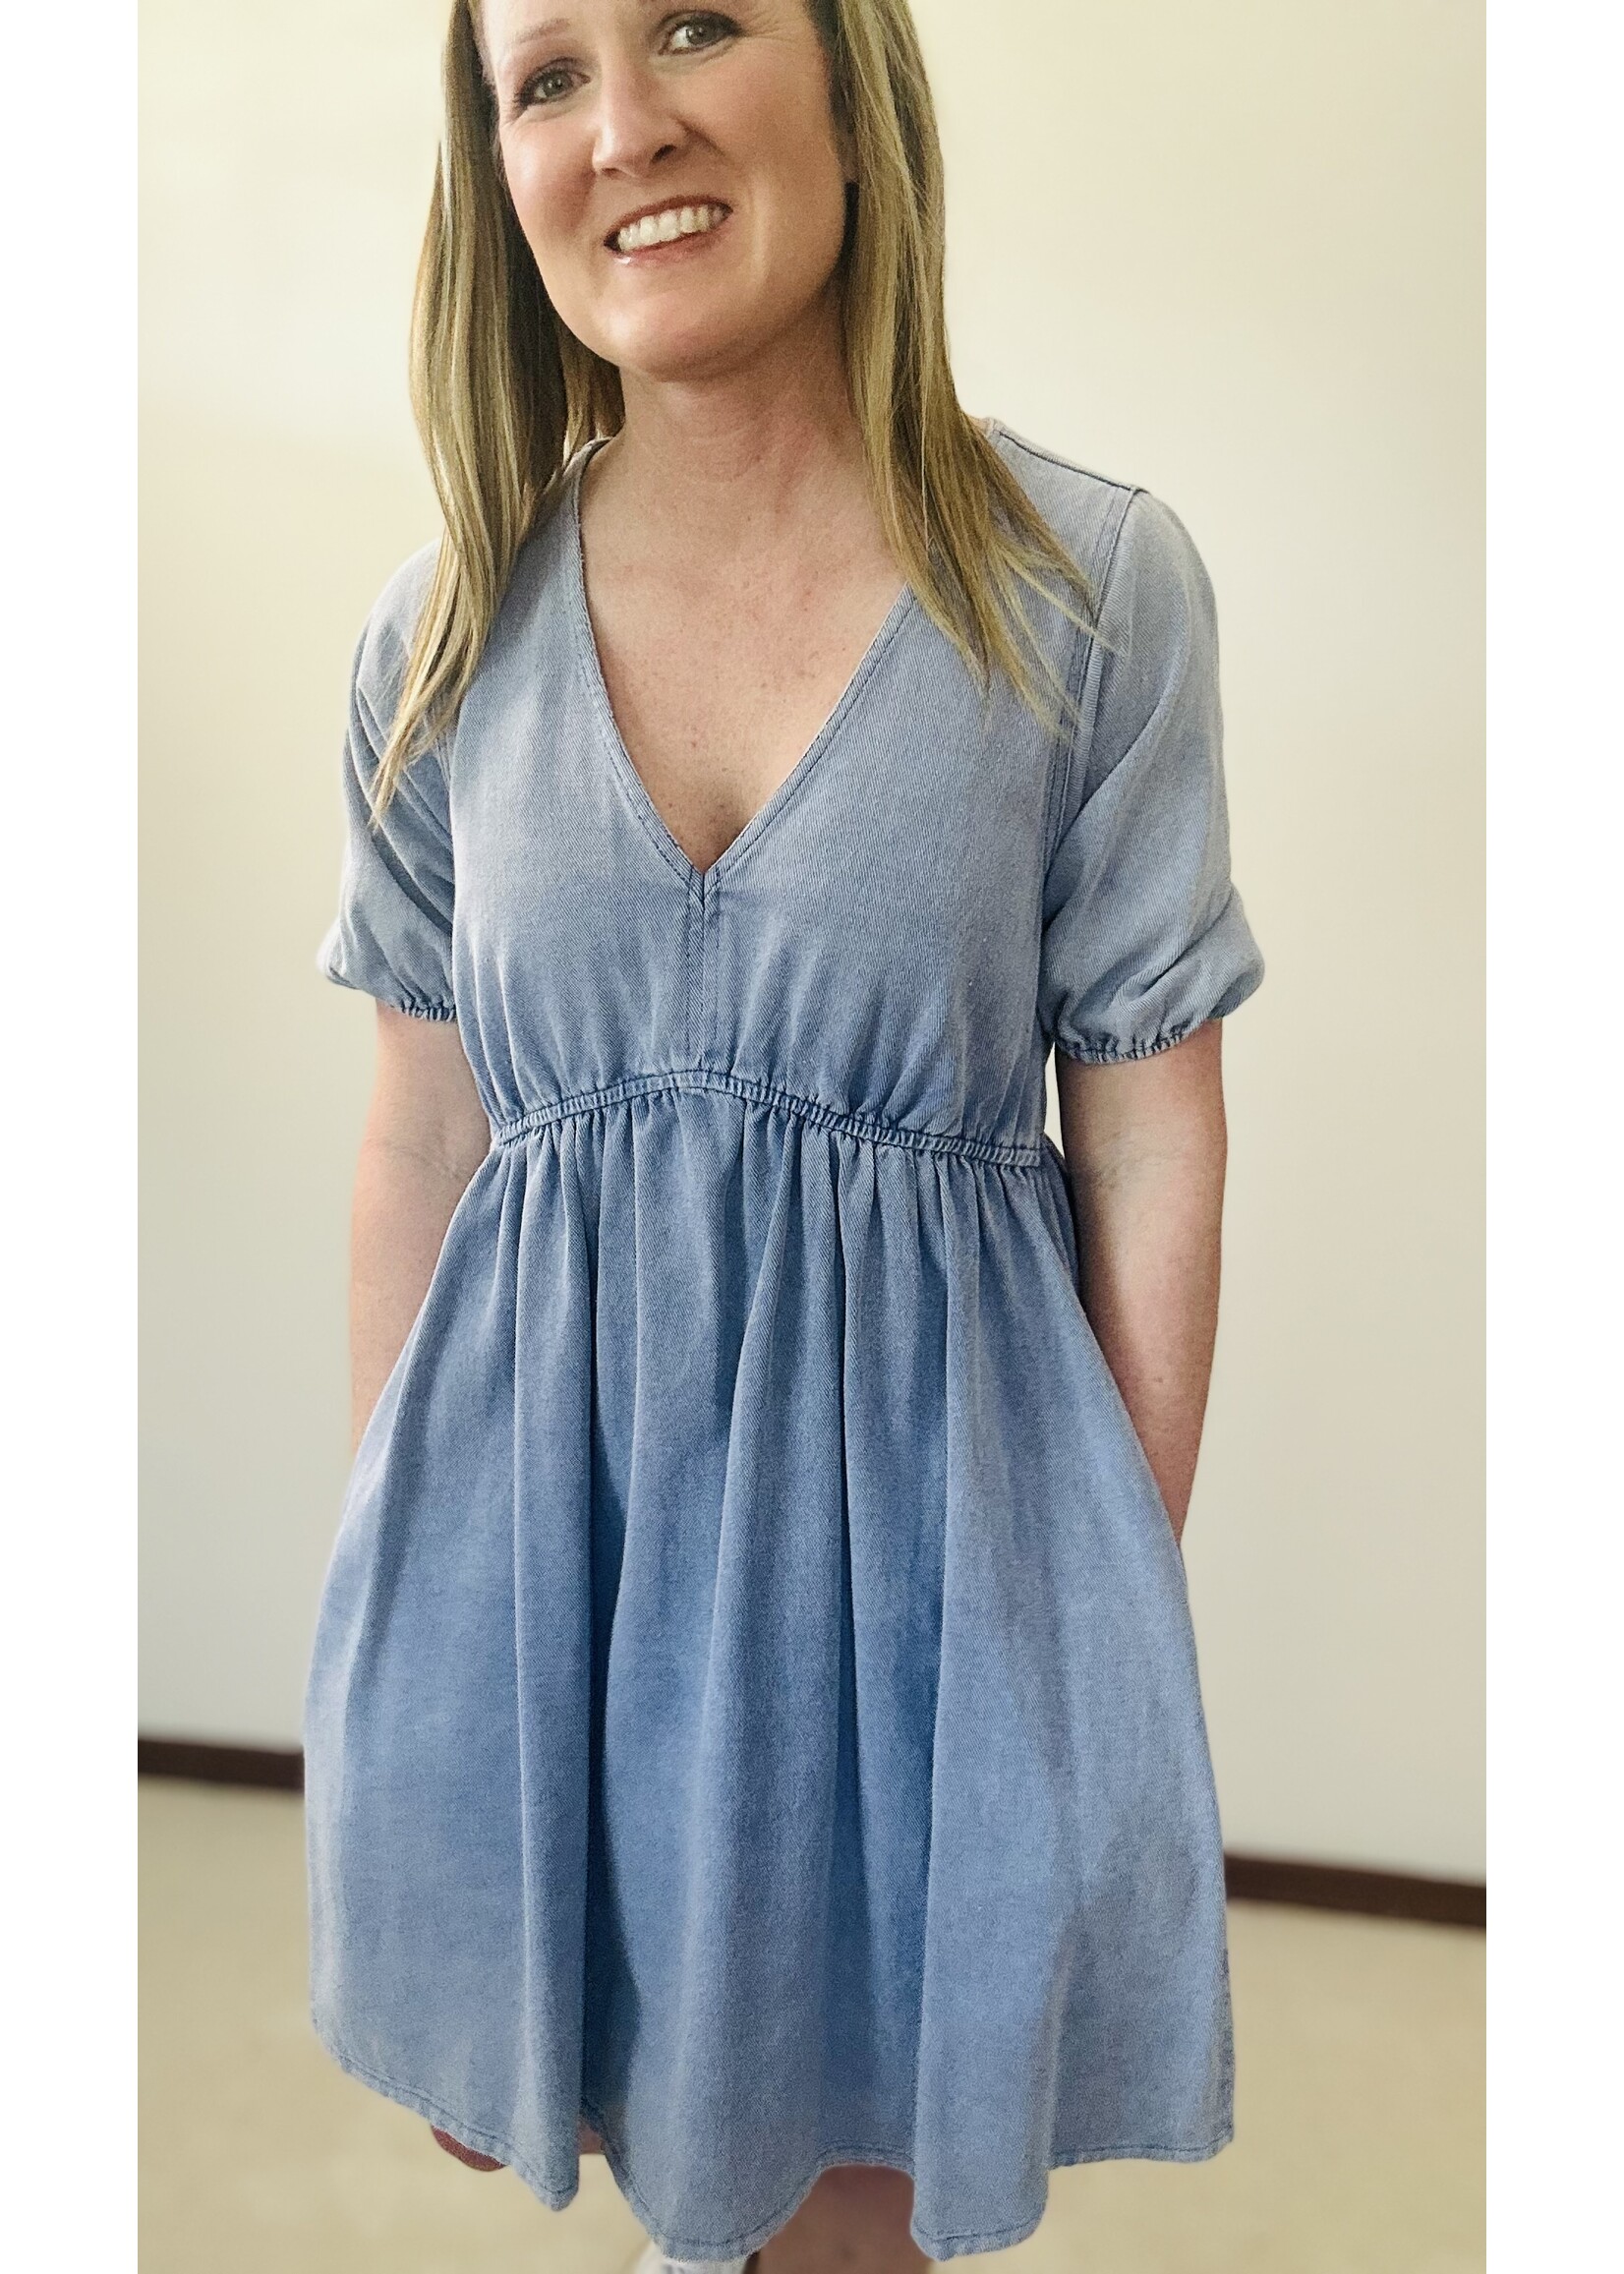 The Madison Dress in Blue